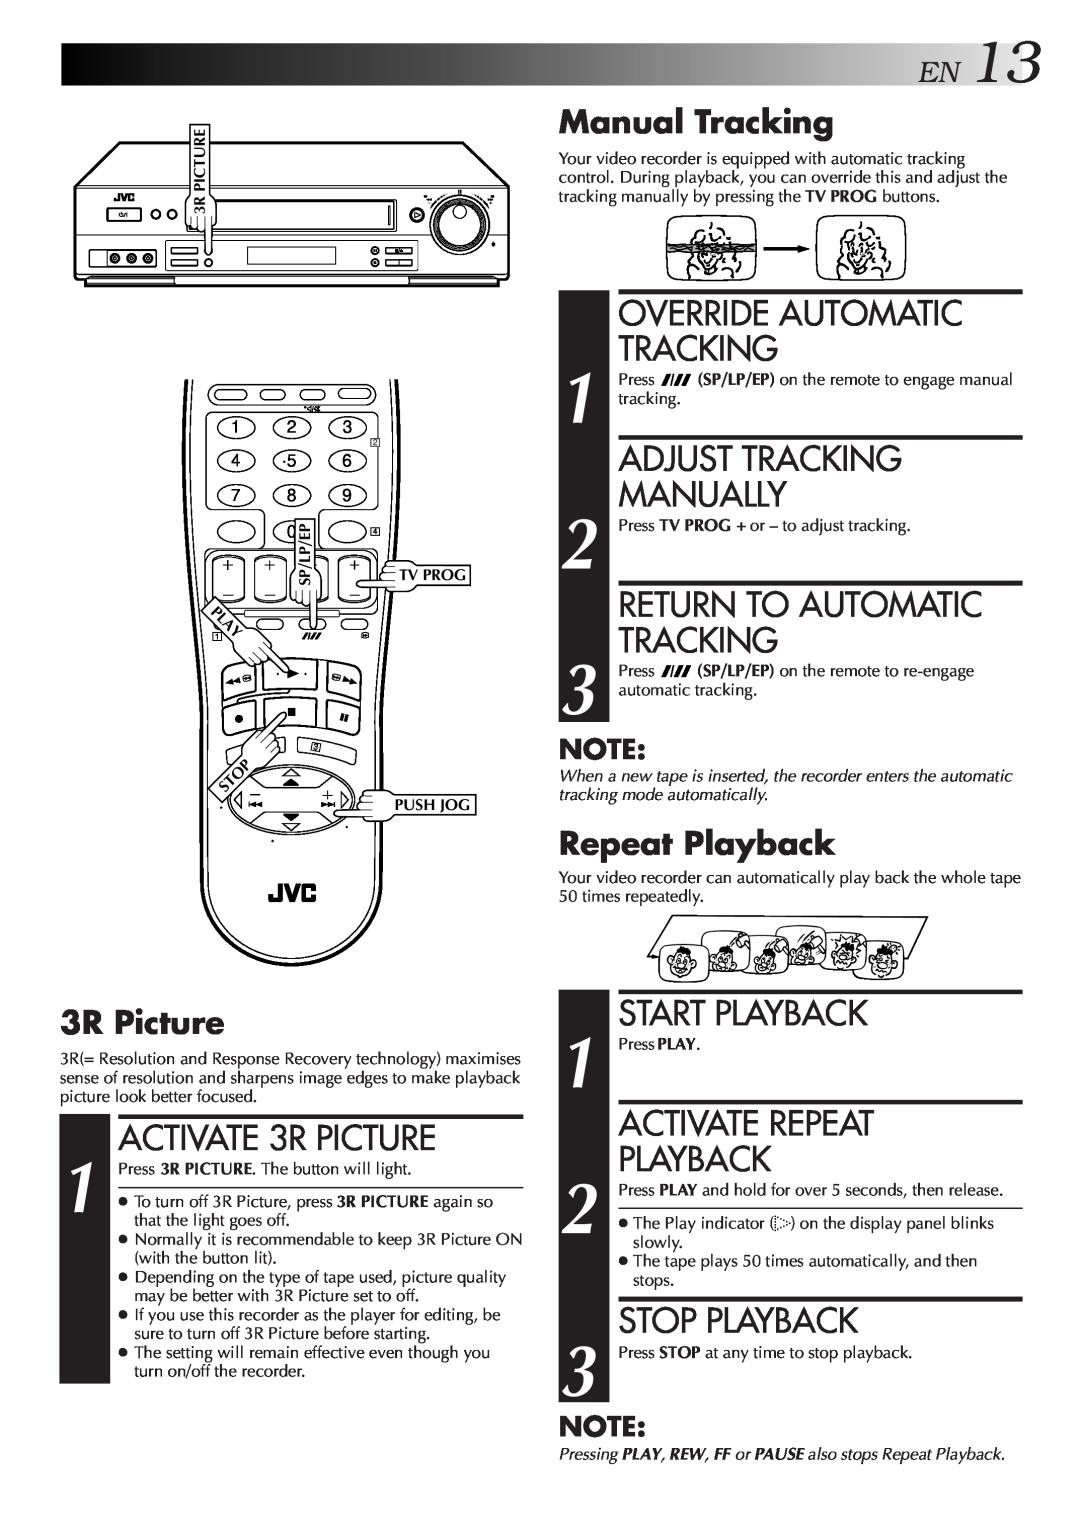 JVC HR-DD857MS EN13, Override Automatic Tracking, Adjust Tracking Manually, Return To Automatic Tracking, Activate Repeat 